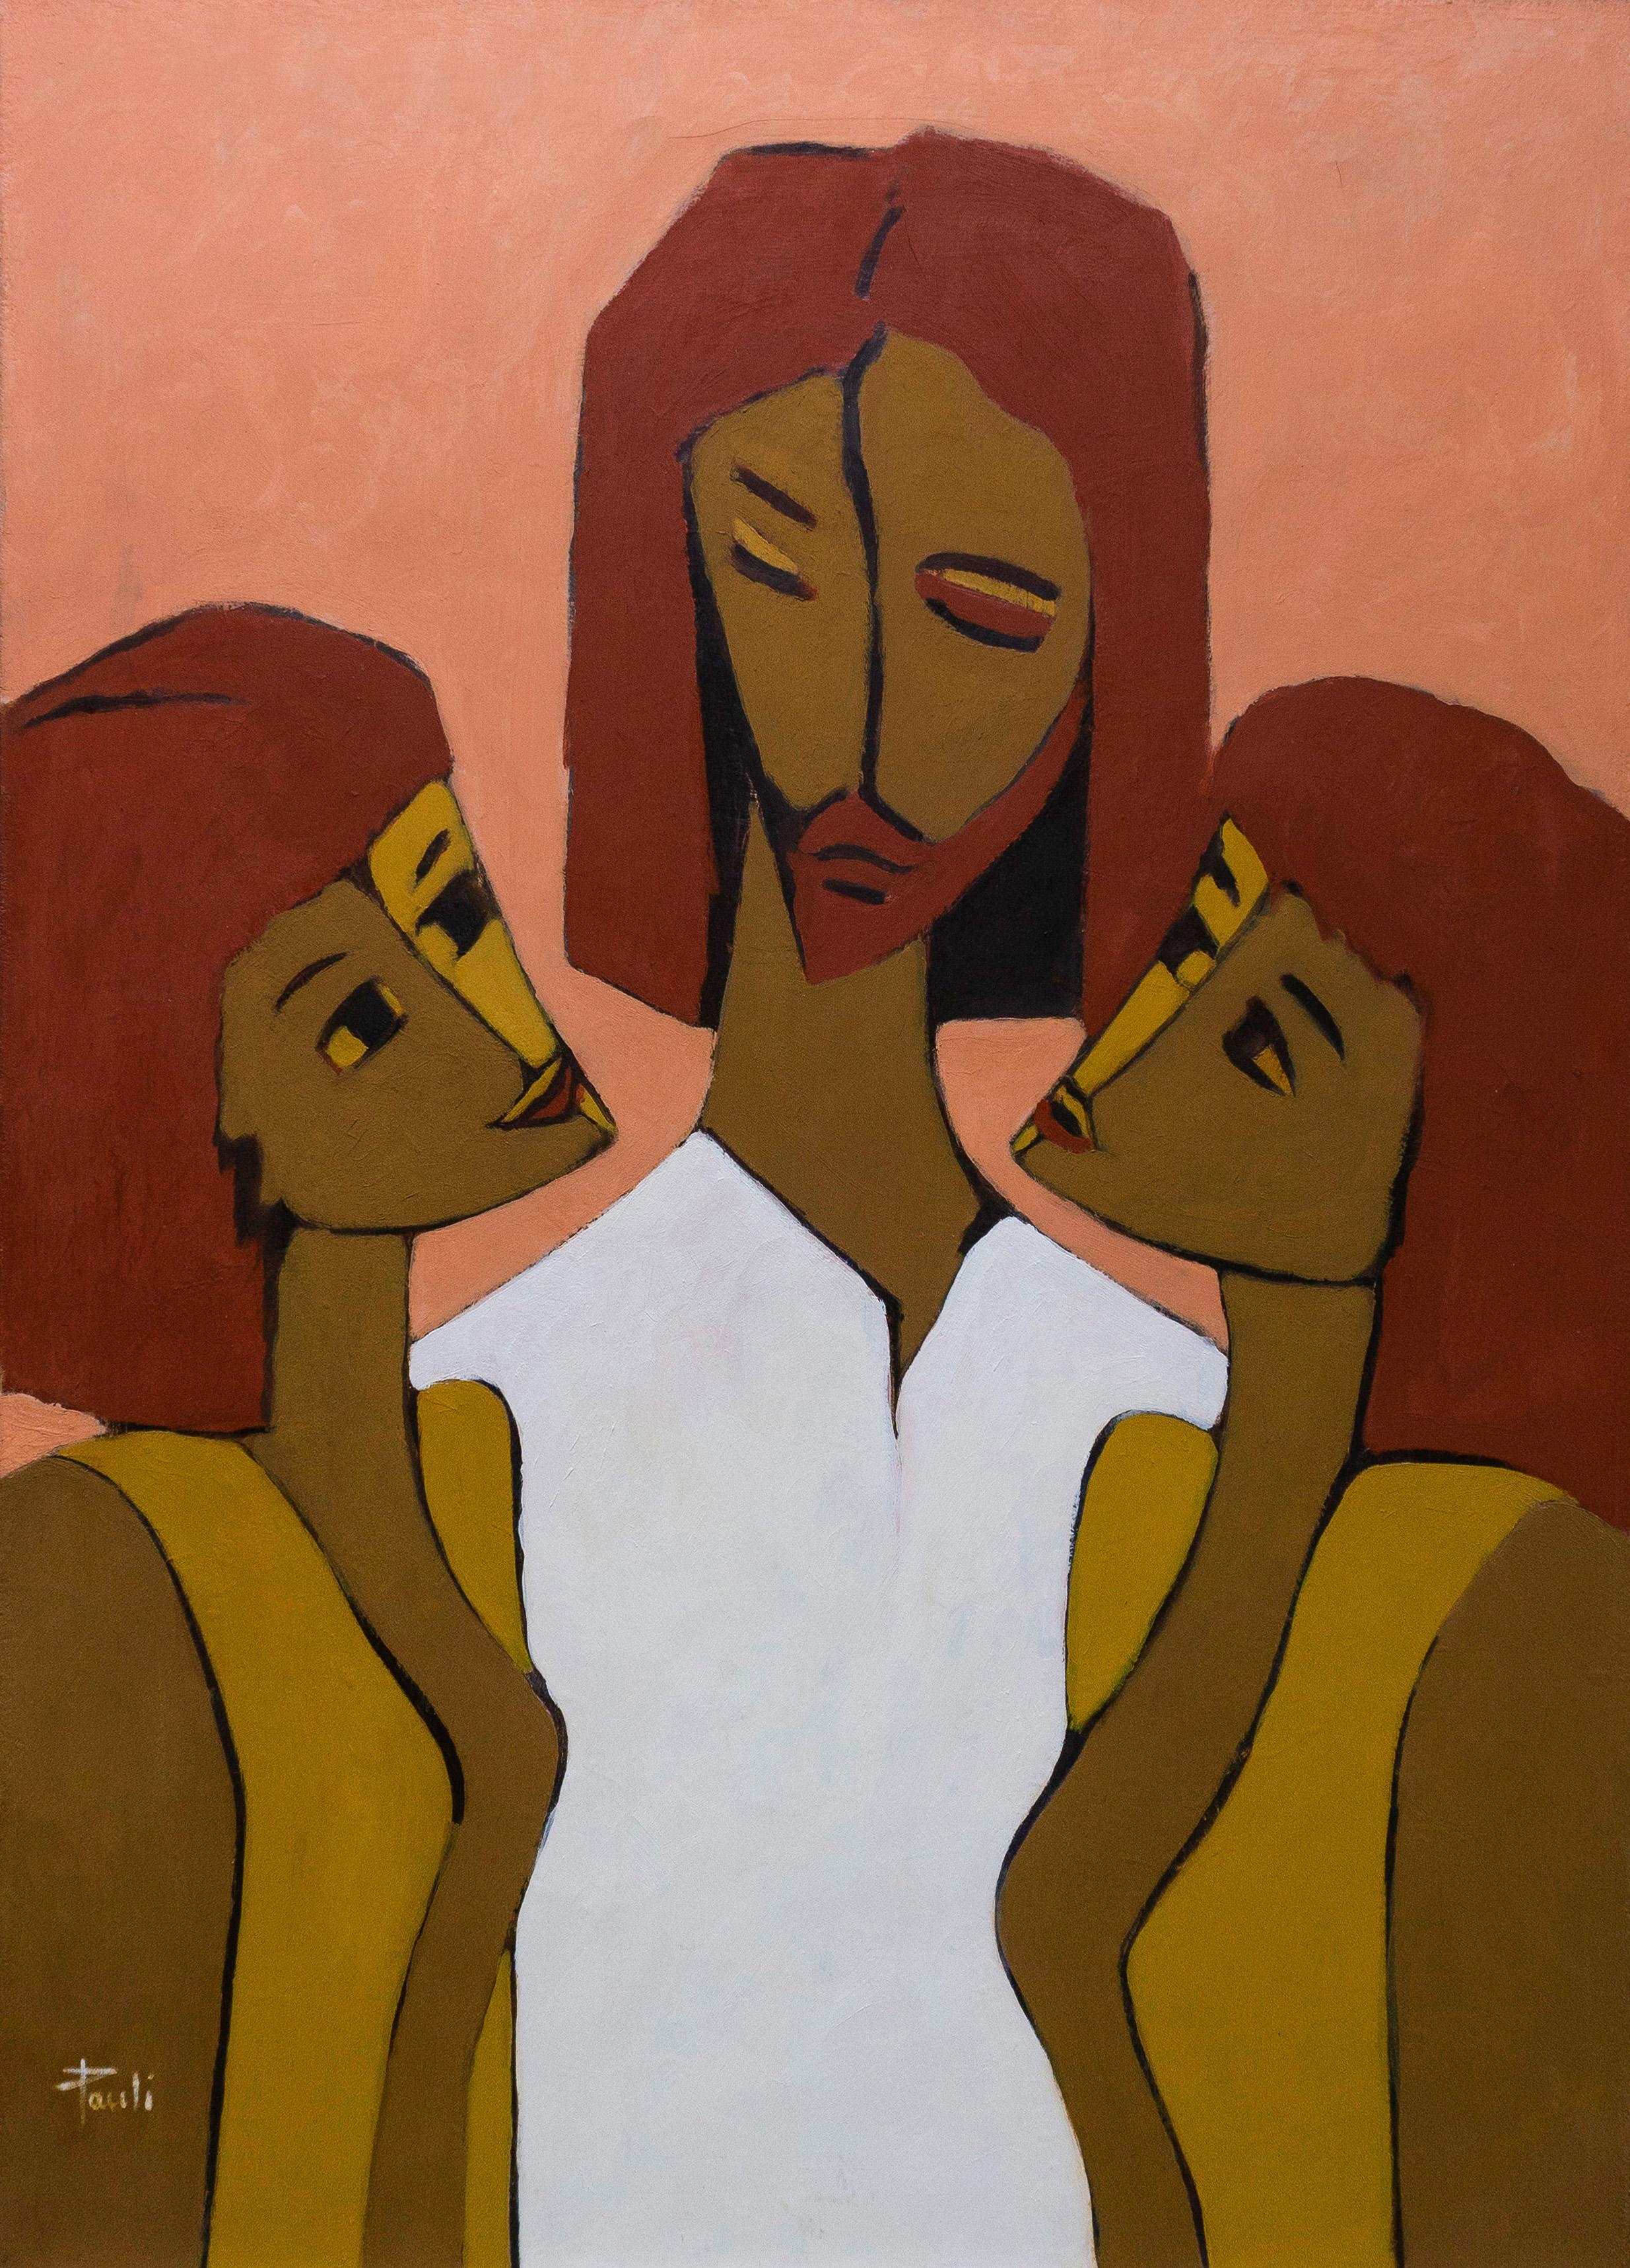 "First words to two women" by Gilbert Pauli - Oil on canvas 